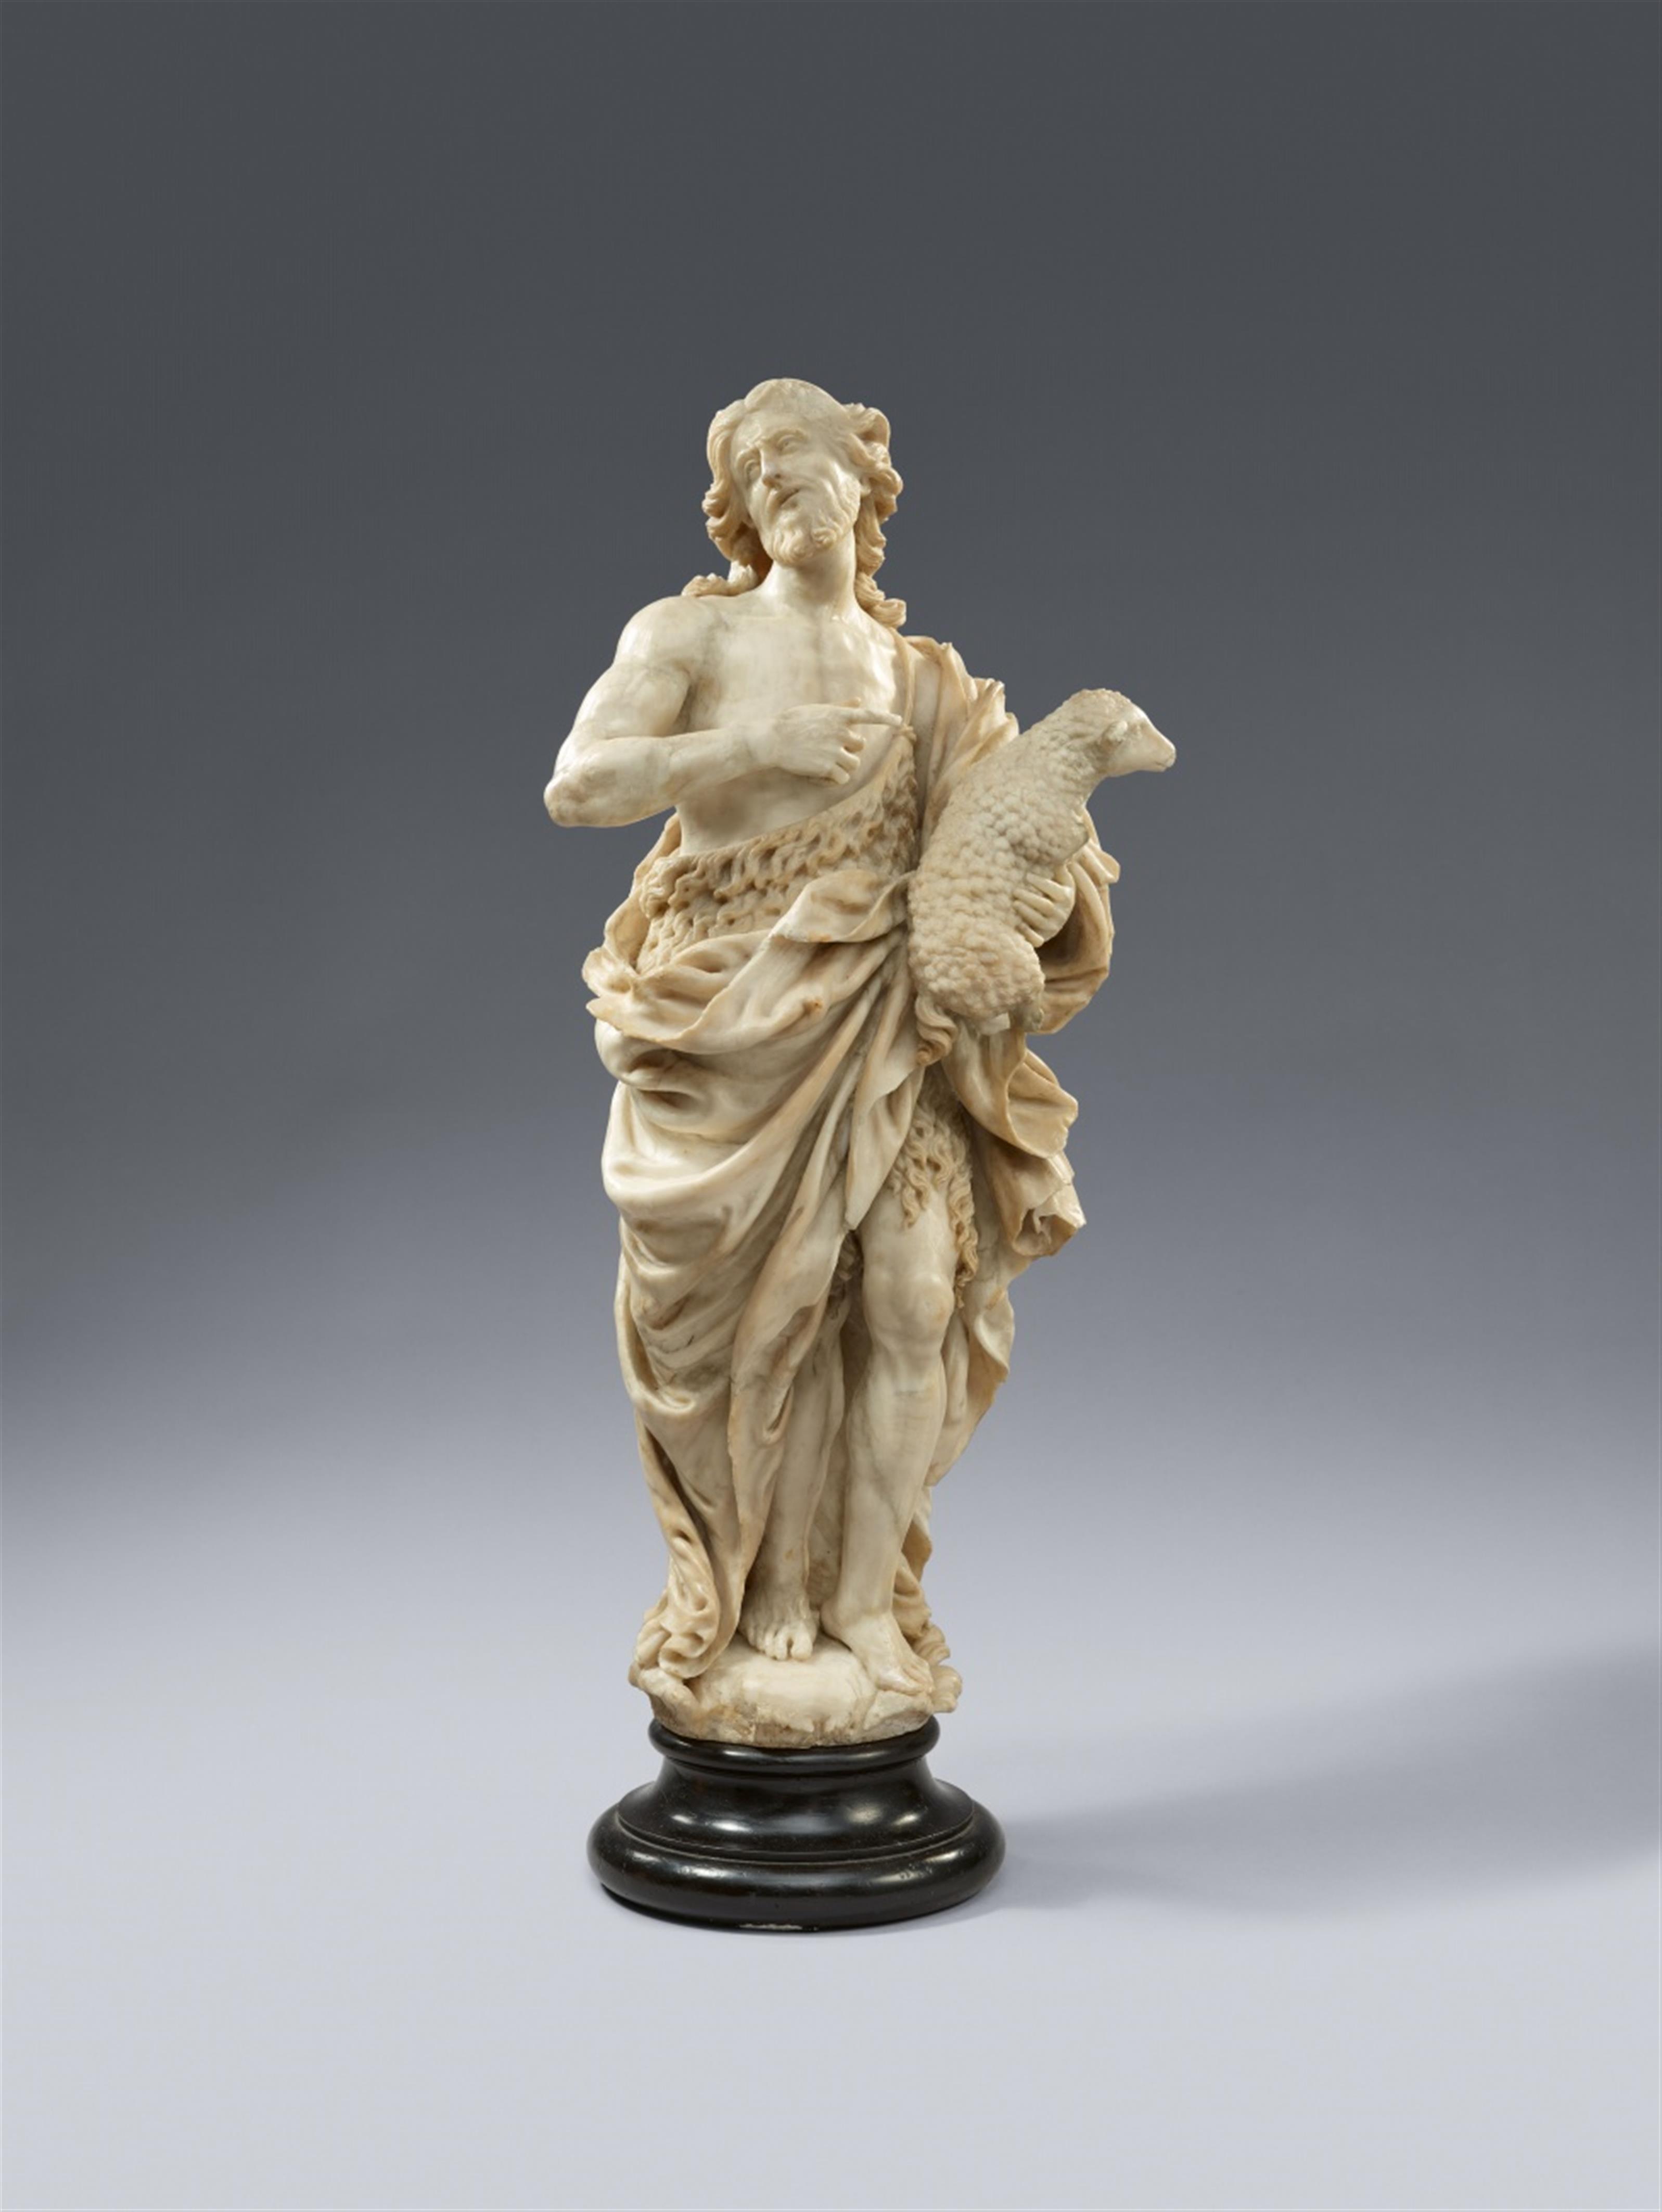 Jean del Cour, circle of - An alabaster figure of John the Baptist, circle of Jean del Cour